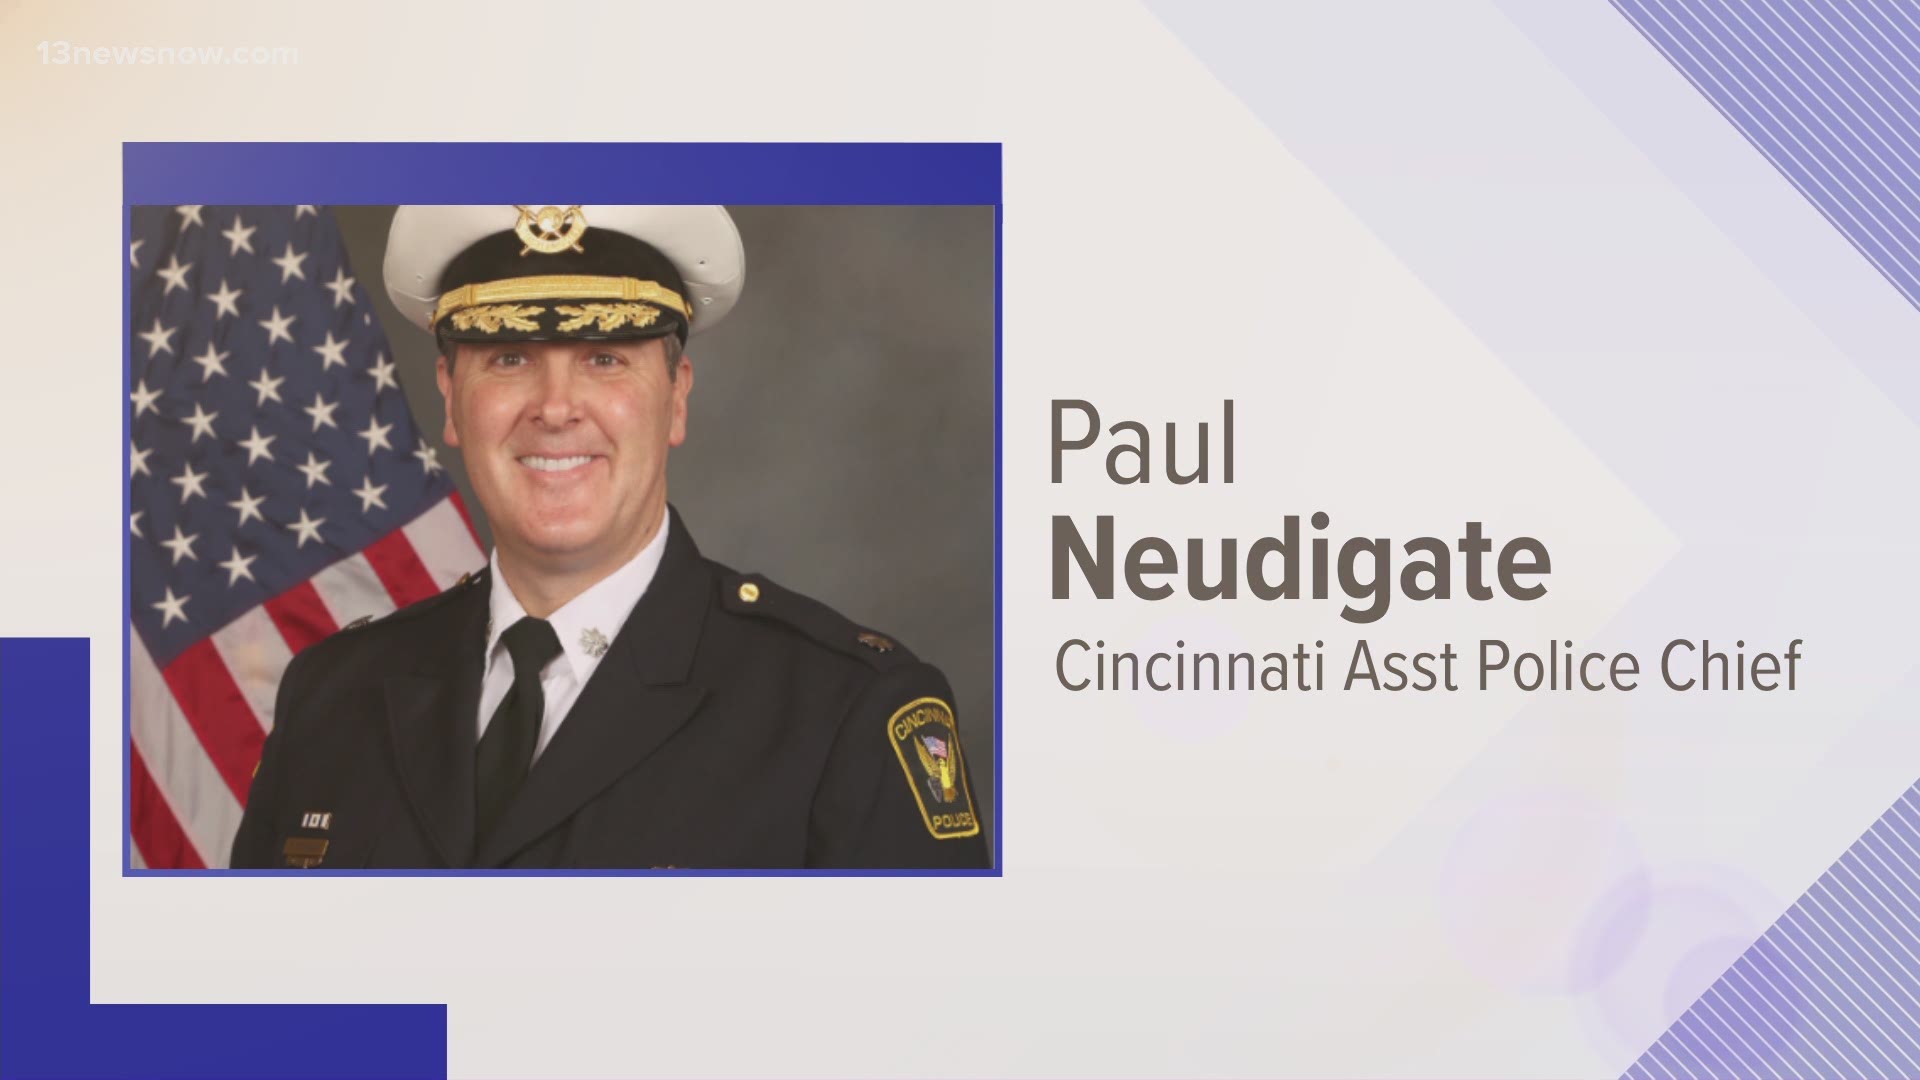 Paul Neudigate will serve as the next head of Virginia Beach Police. He's the assistant chief of Cincinnati Police. He served on that police force for 30 years.